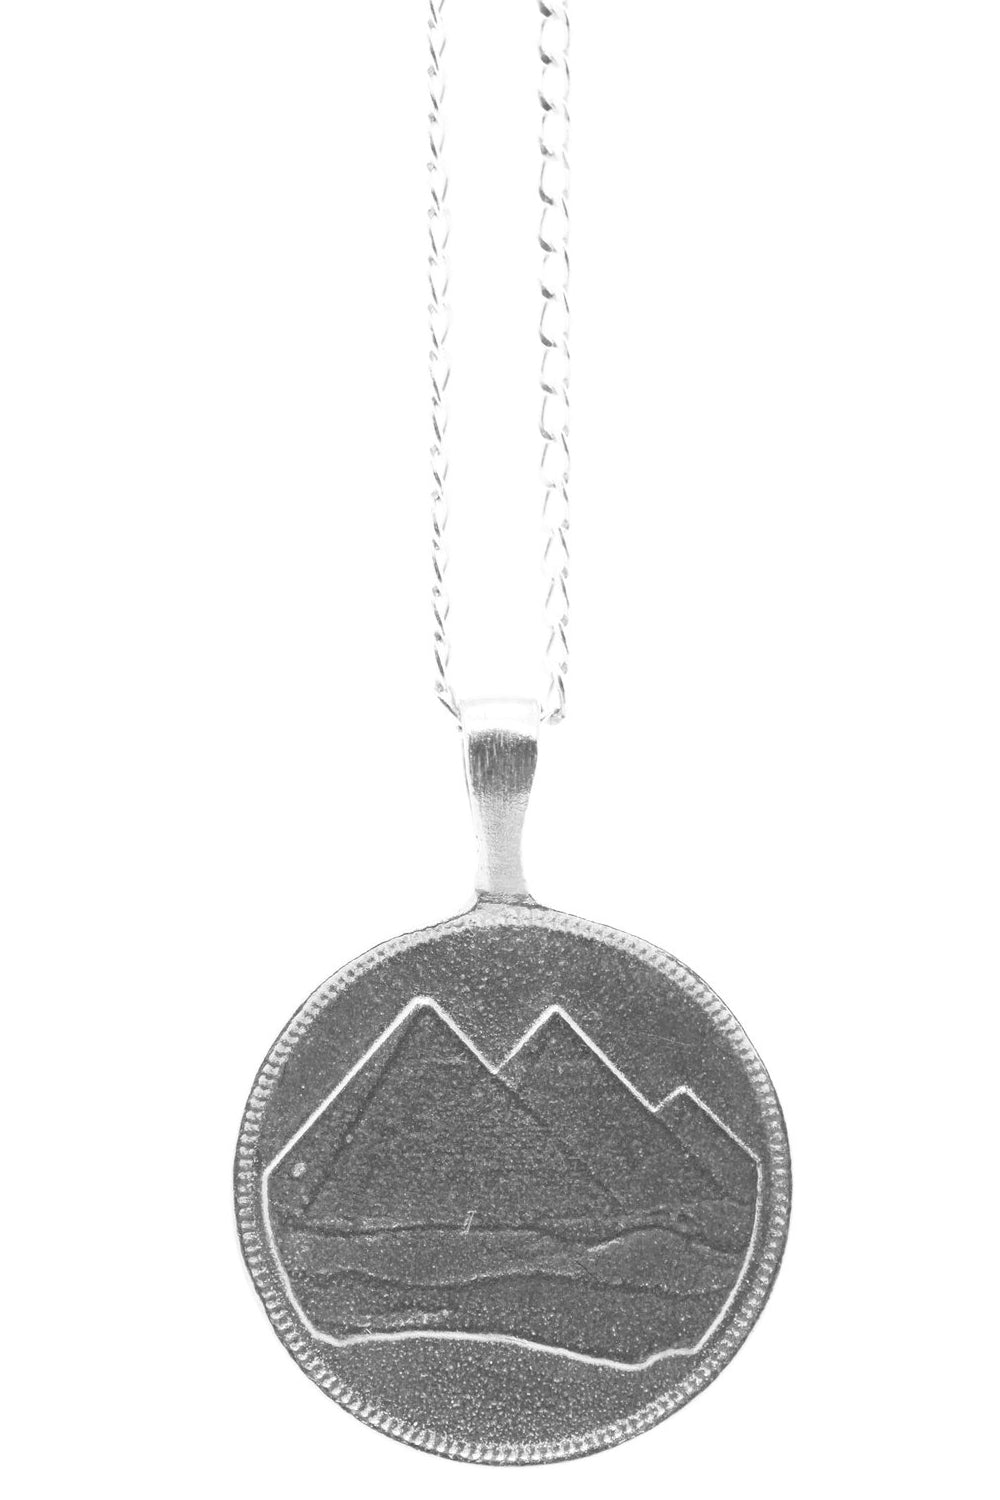 THE PYRAMID Coin Necklace - ShopAuthentique